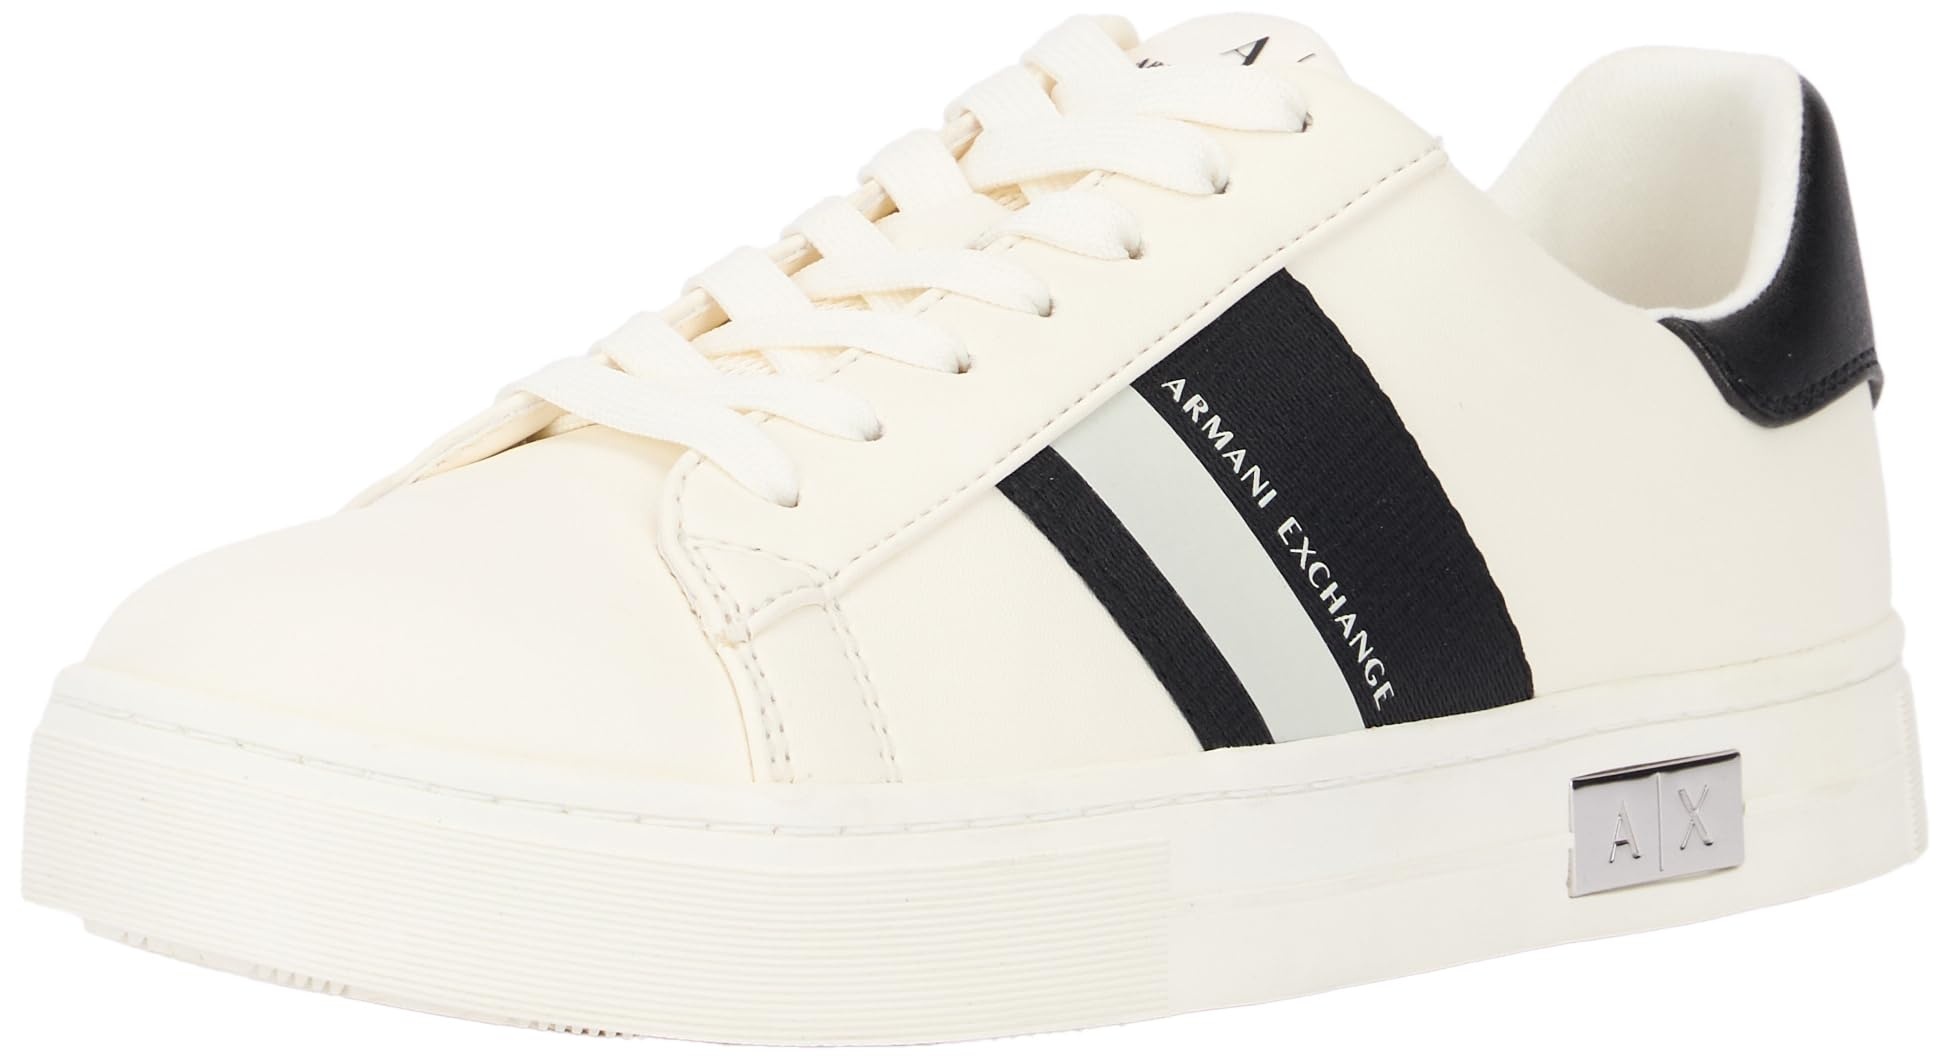 Armani Exchange Damen Cup Sole Mina, Back tab with and Metal Logo Detail on Side Sneaker, Off White+Black, 36.5 EU